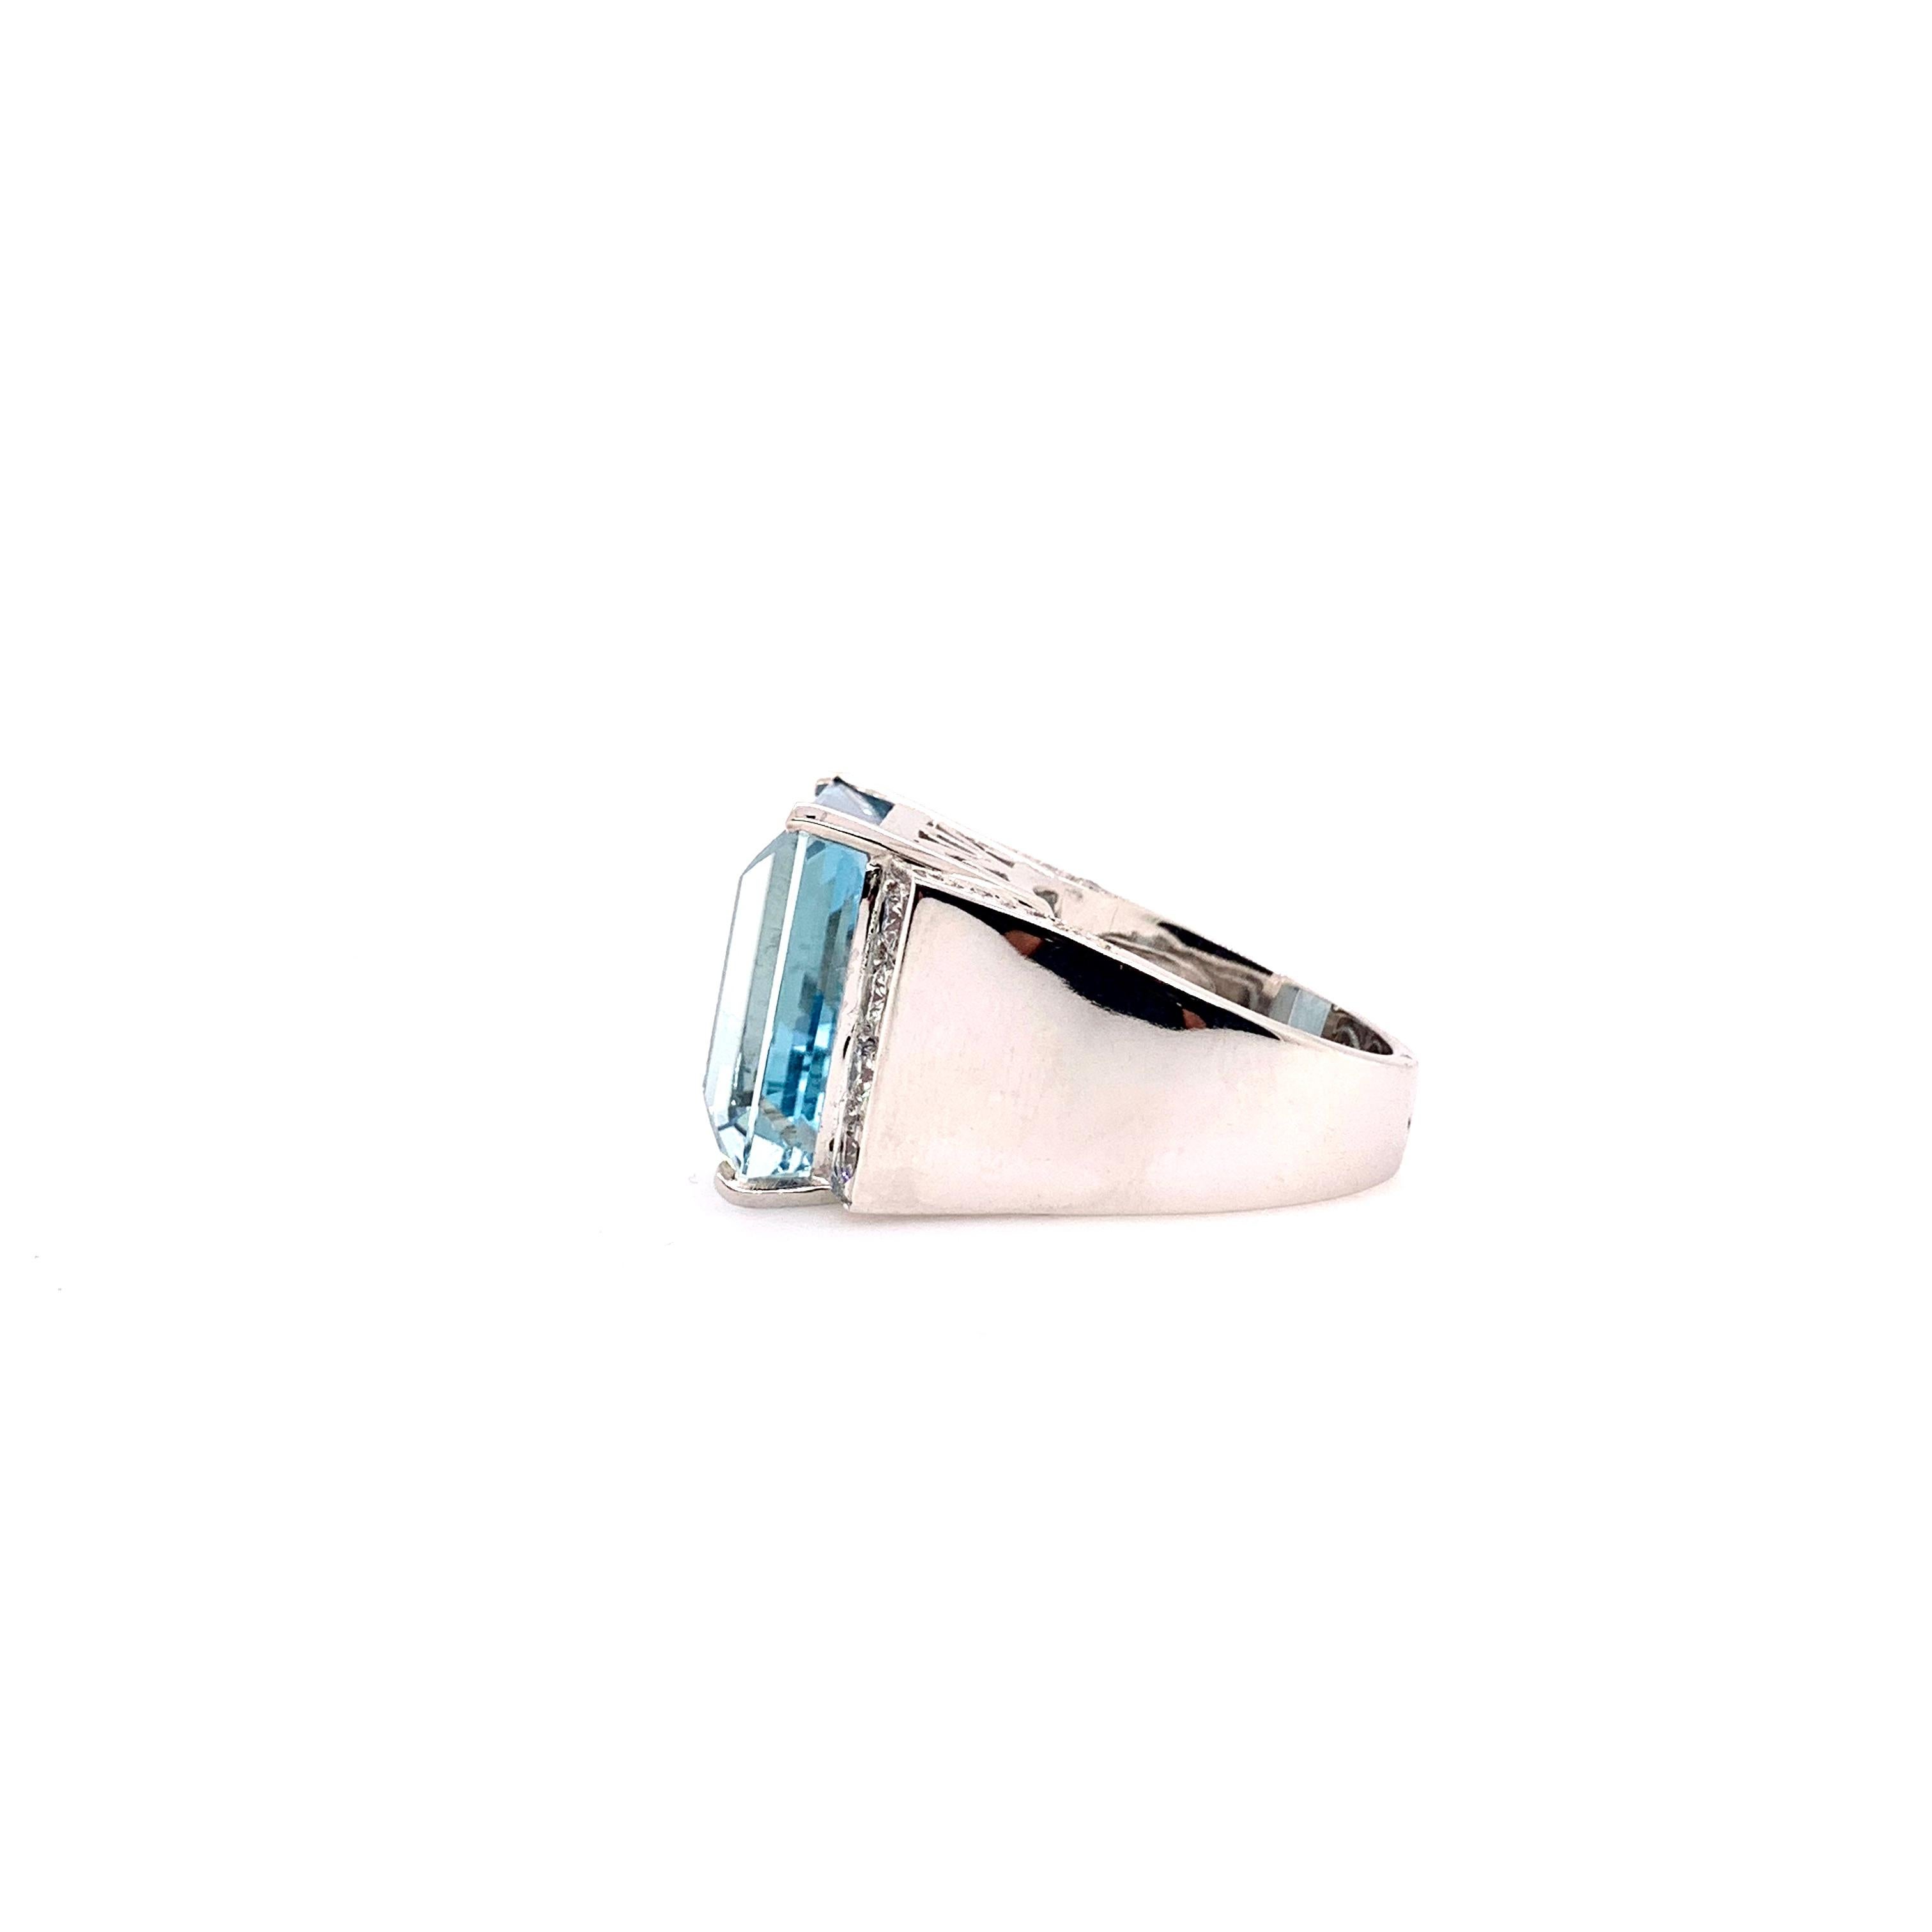 This symmetrical Aquamarine ring will captivate the audience's eyes!   The 20ct emerald cut Aquamarine has 1.15 cts of round brilliant diamonds on the shoulders of the ring.   The 14k white gold shank is generous in weight to fully support the